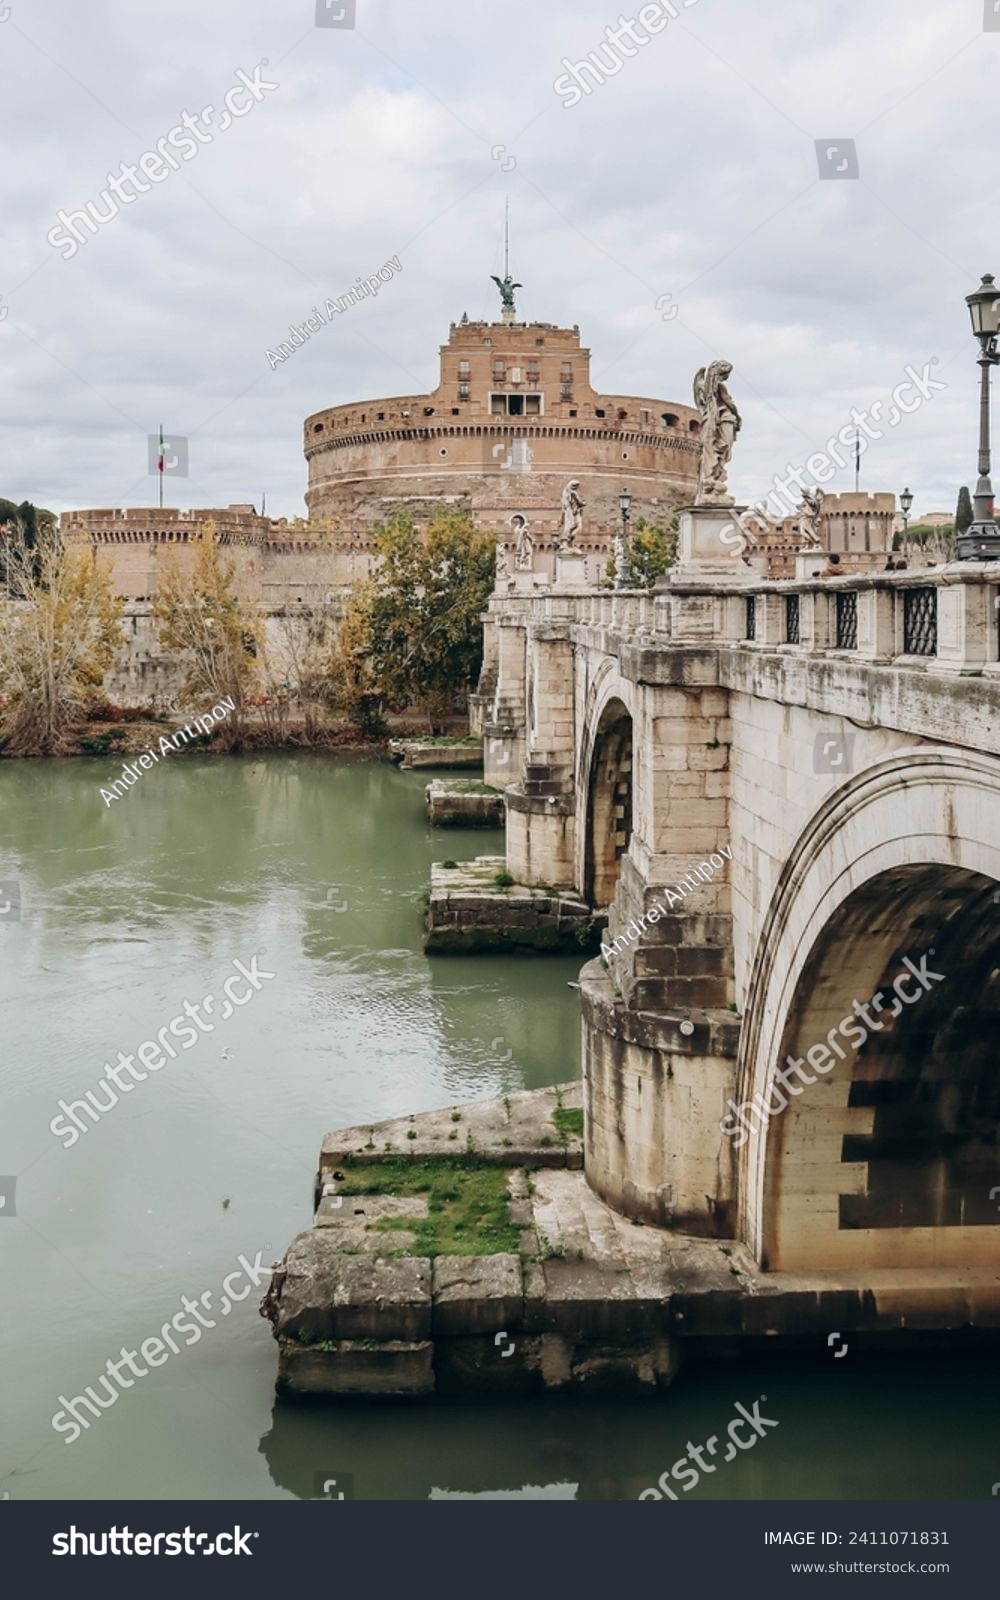 St. Angelo Bridge and Castel Sant'Angelo in Rome on a cloudy December day #2411071831